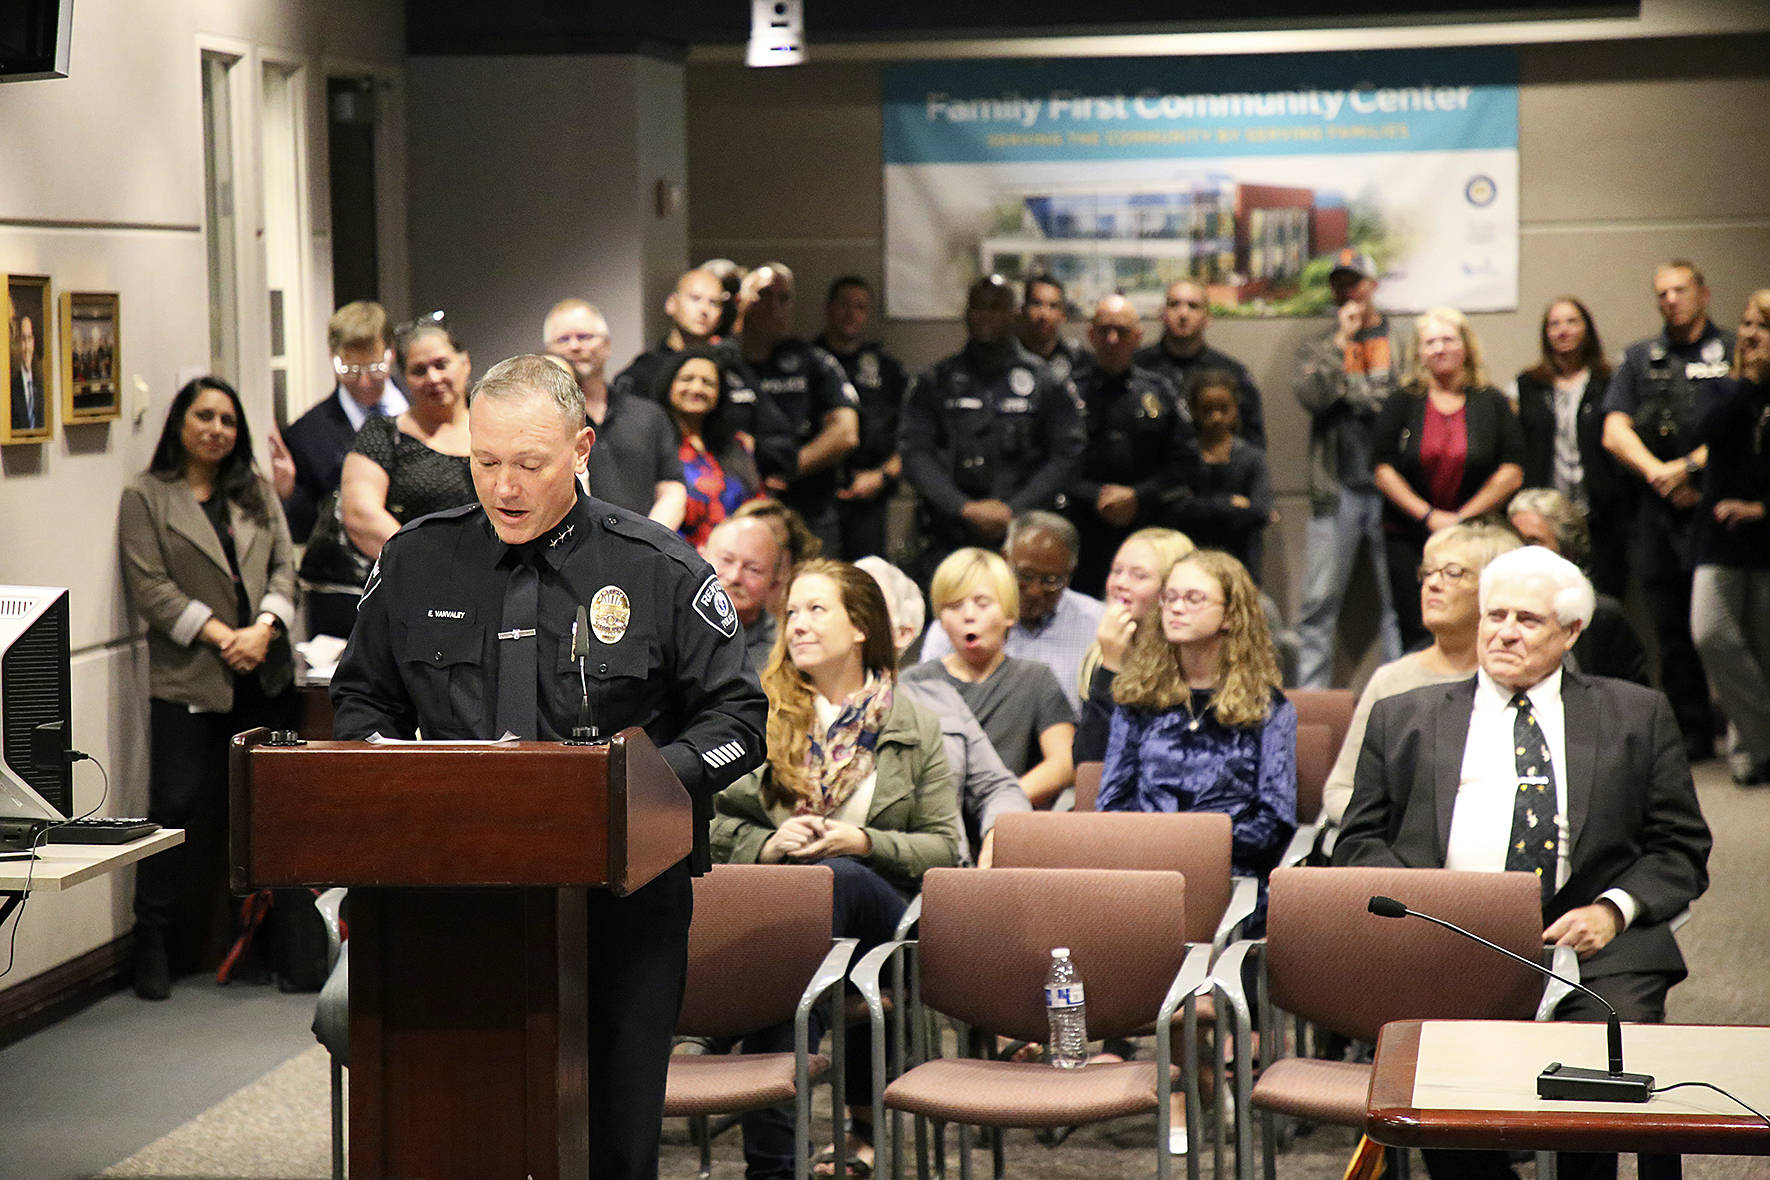 Police Chief Ed VanValey gives a speech at his swearing in. Photo by Ava Van, City of Renton.